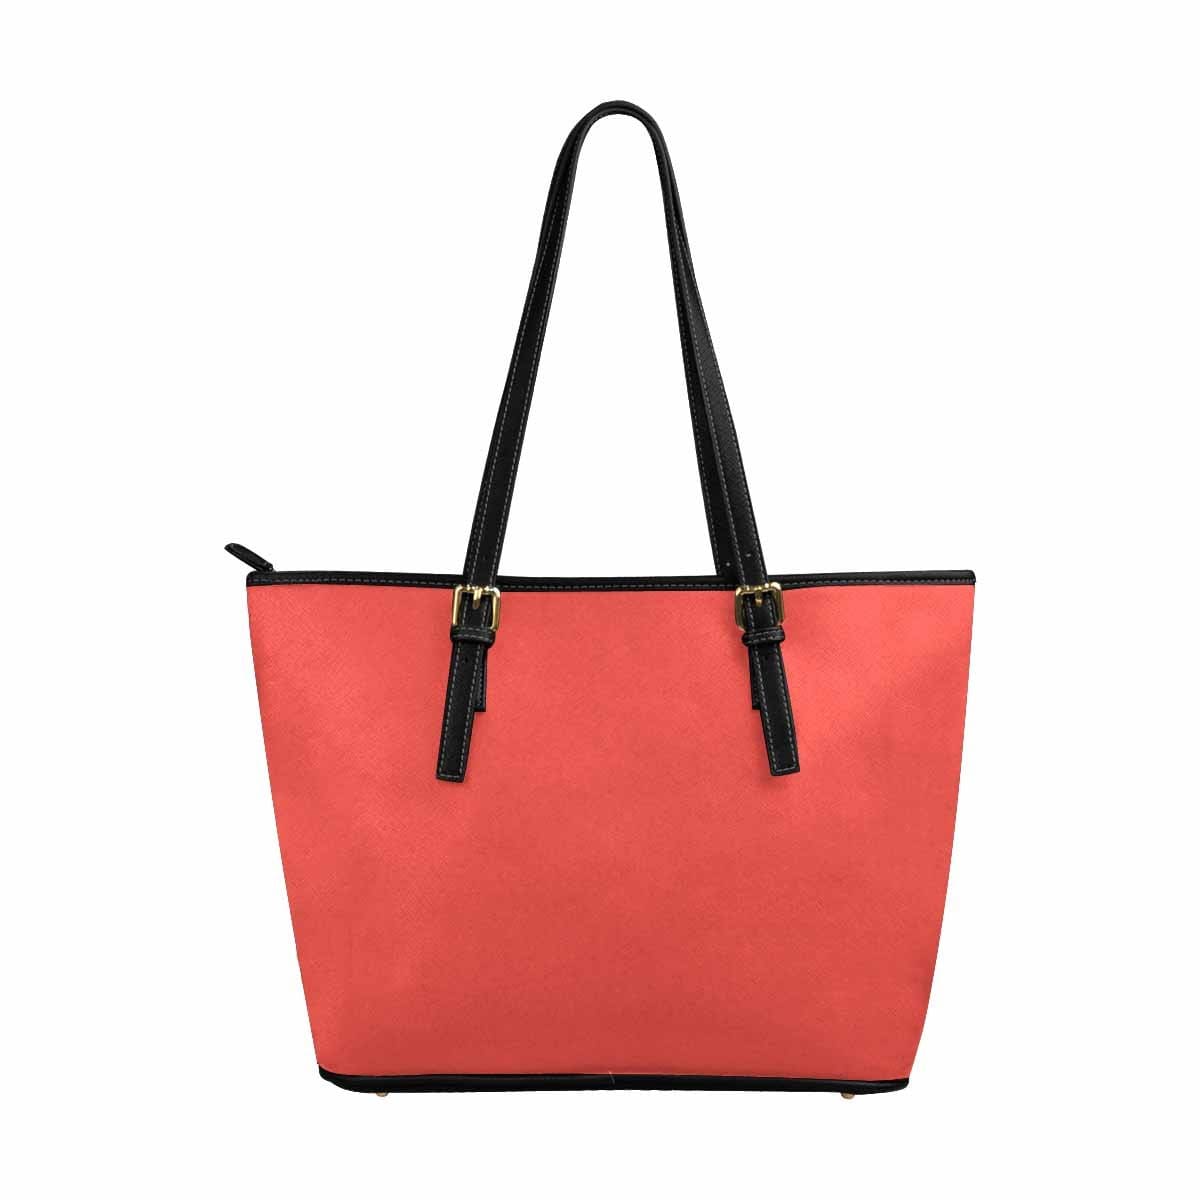 Large Leather Tote Shoulder Bag - Red Orange - Bags | Leather Tote Bags